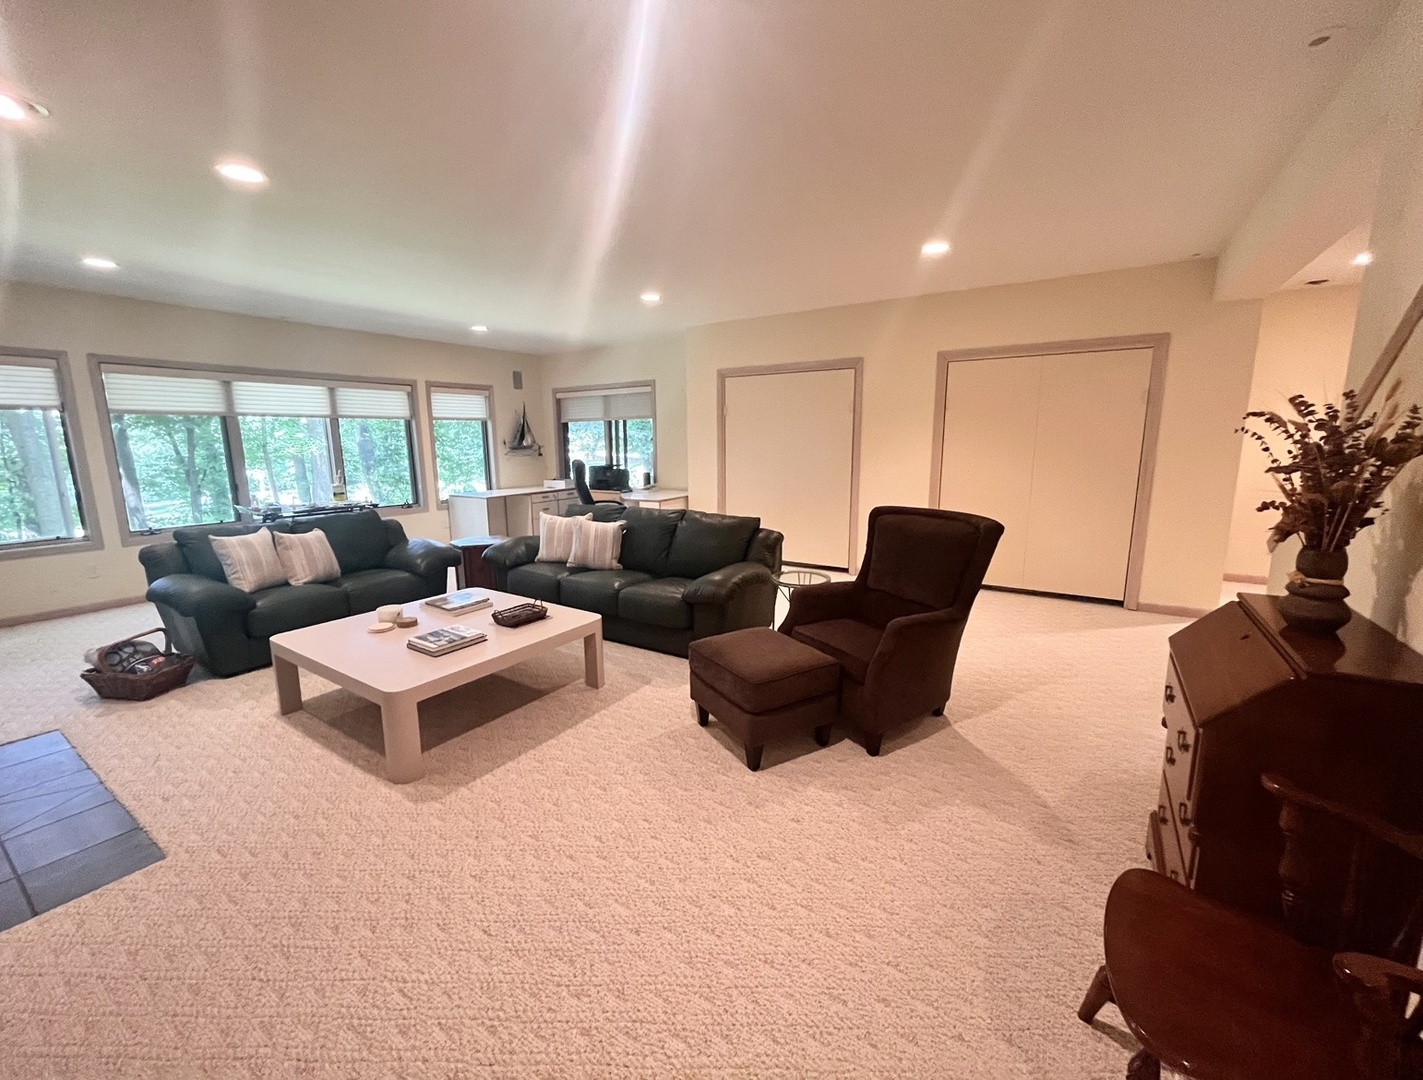 Kick back & relax with a movie in the serene walk-out lower-level living area